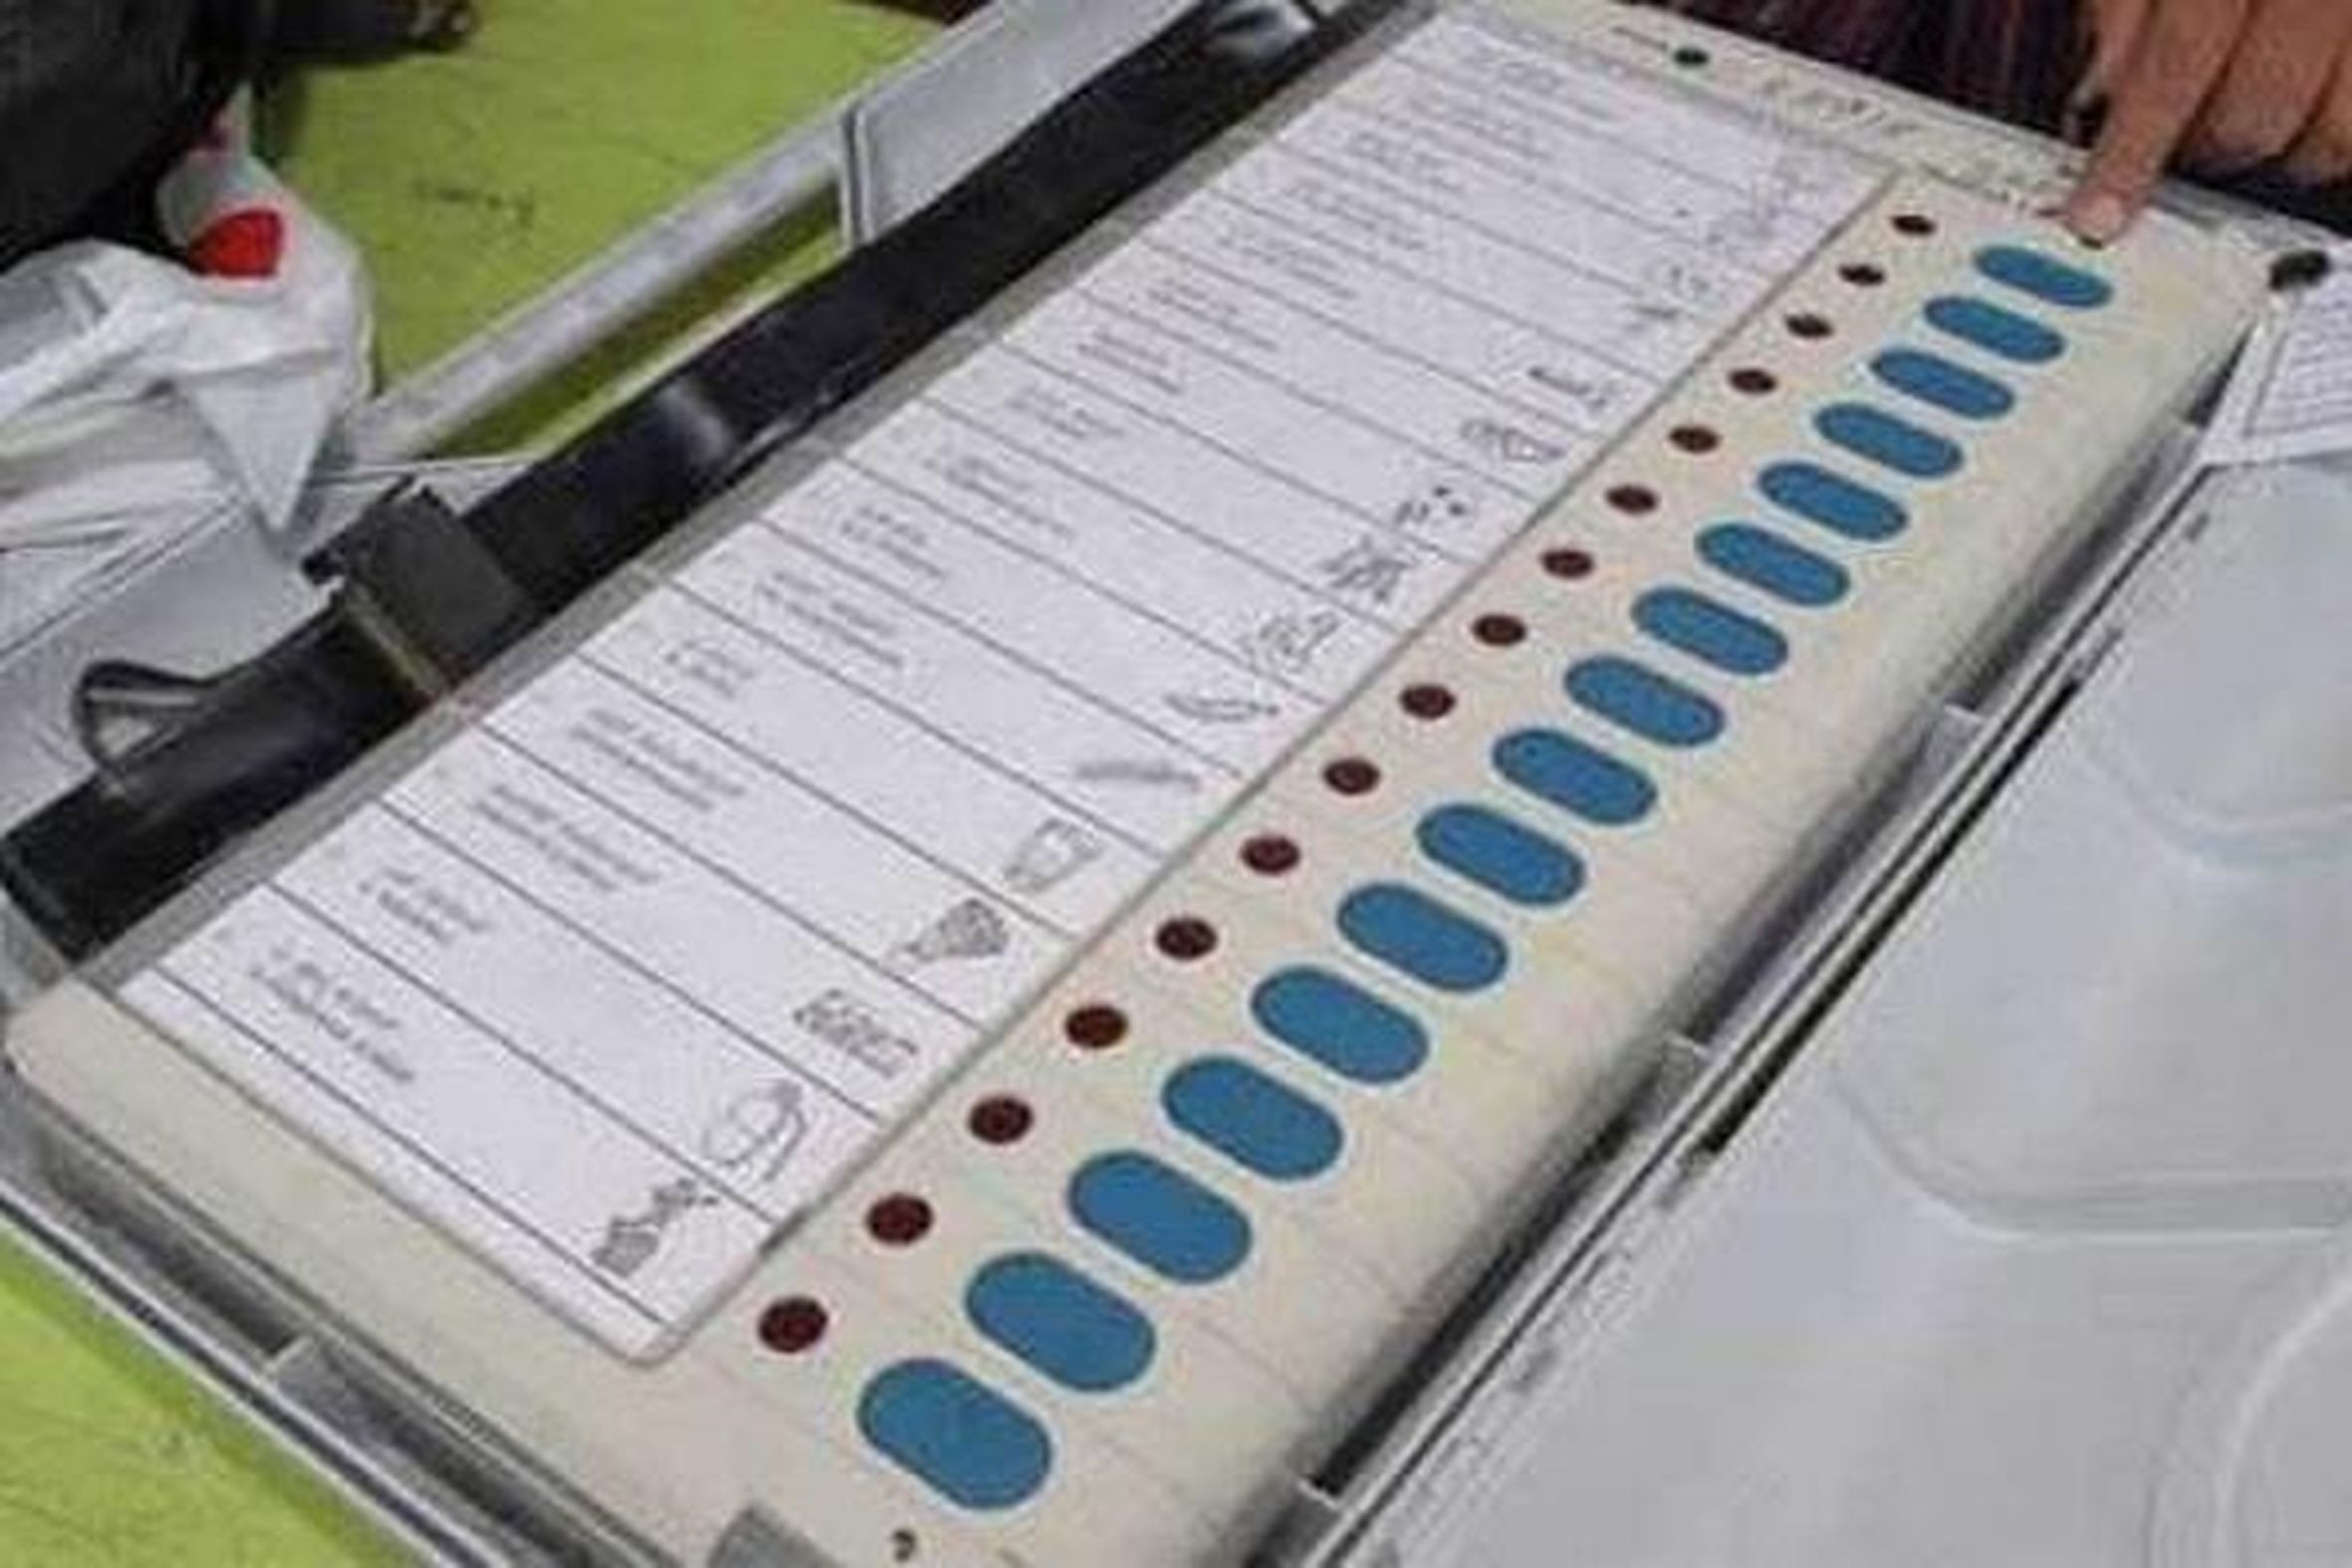 Congress candidate who reached the Strong Room after on EVM